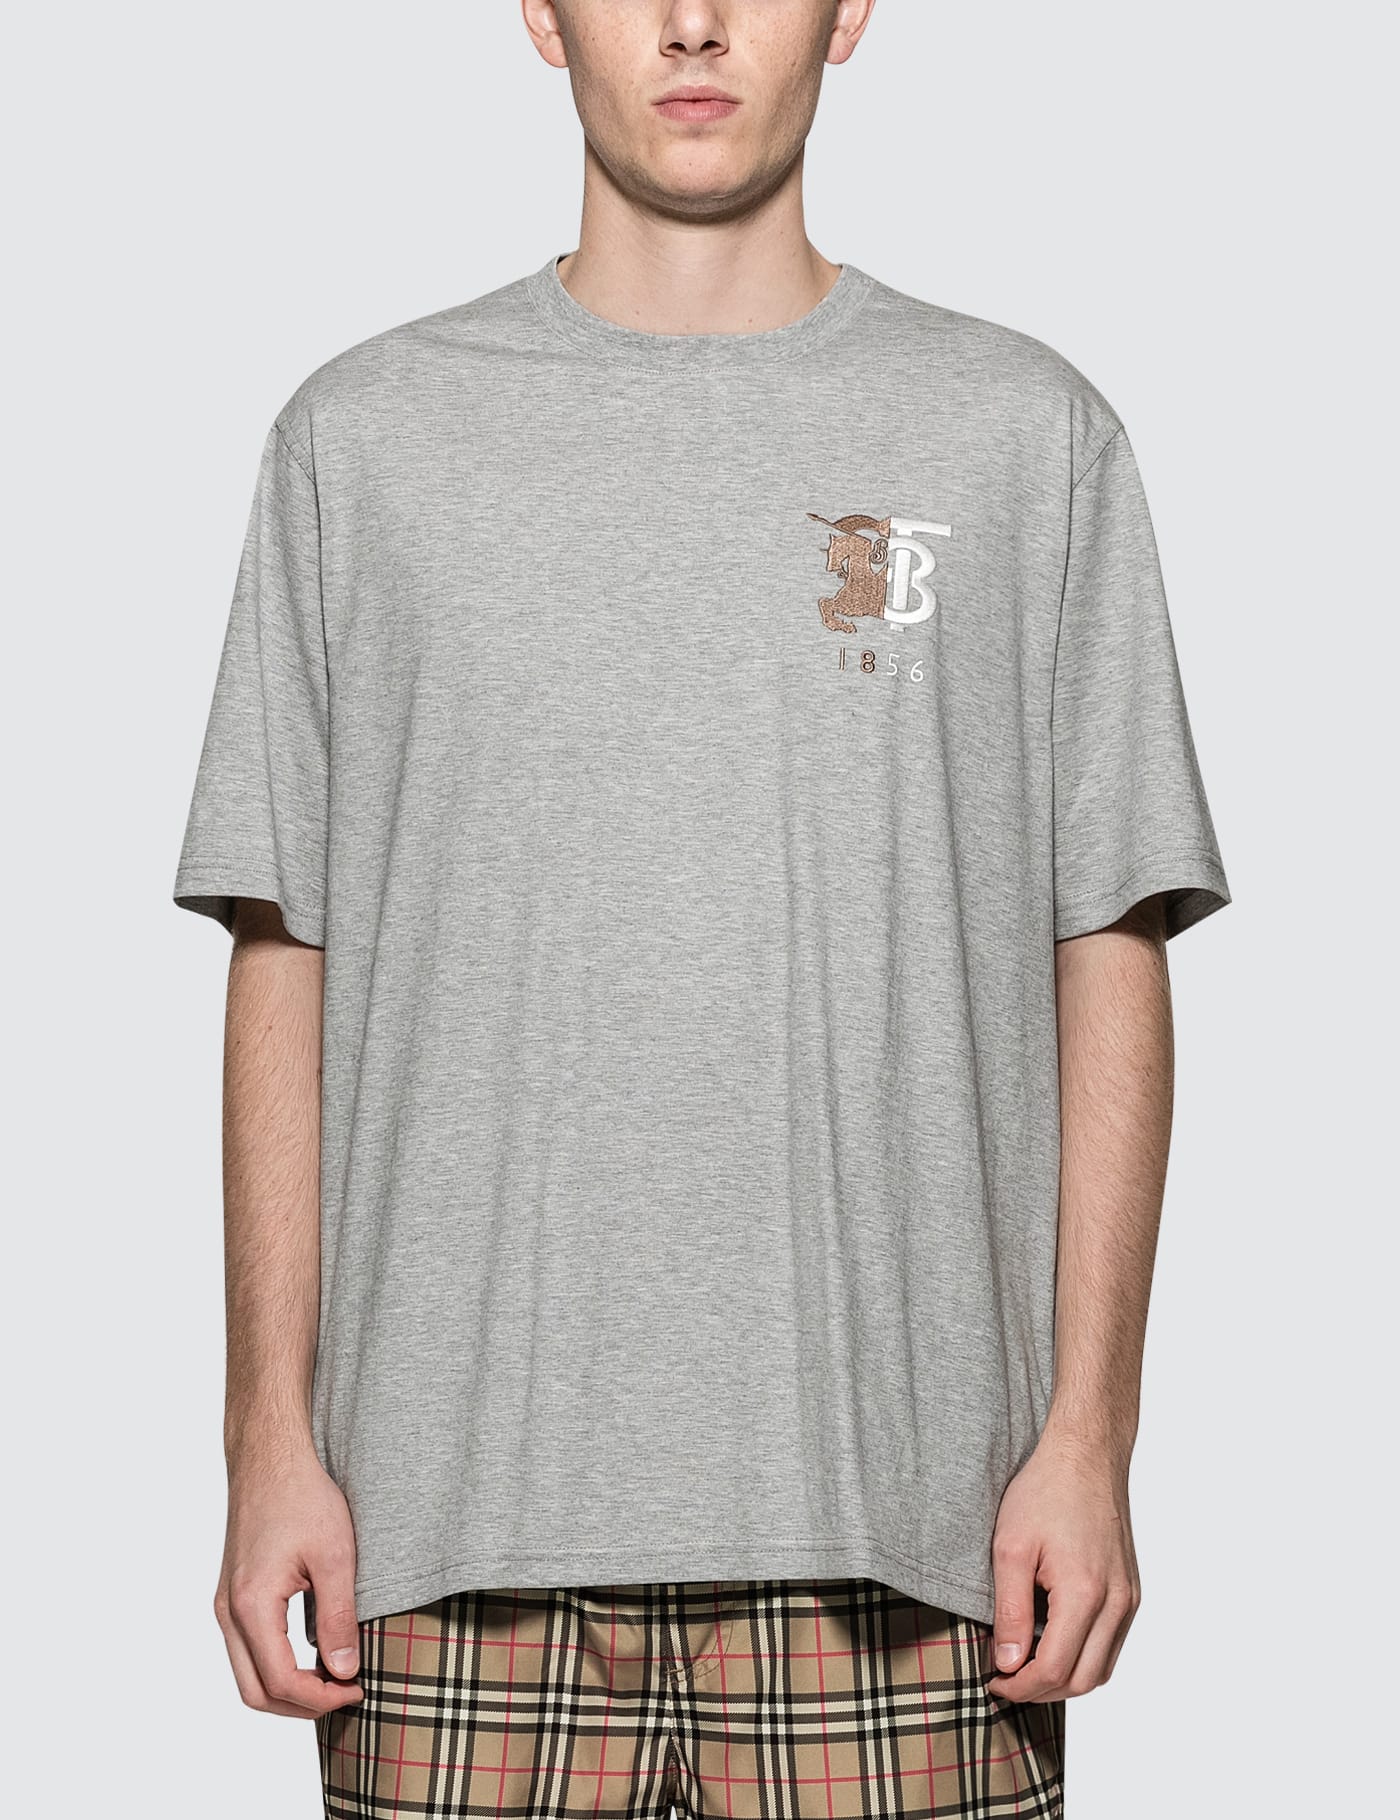 Burberry - 1856 Logo T-Shirt | HBX - Globally Curated Fashion and